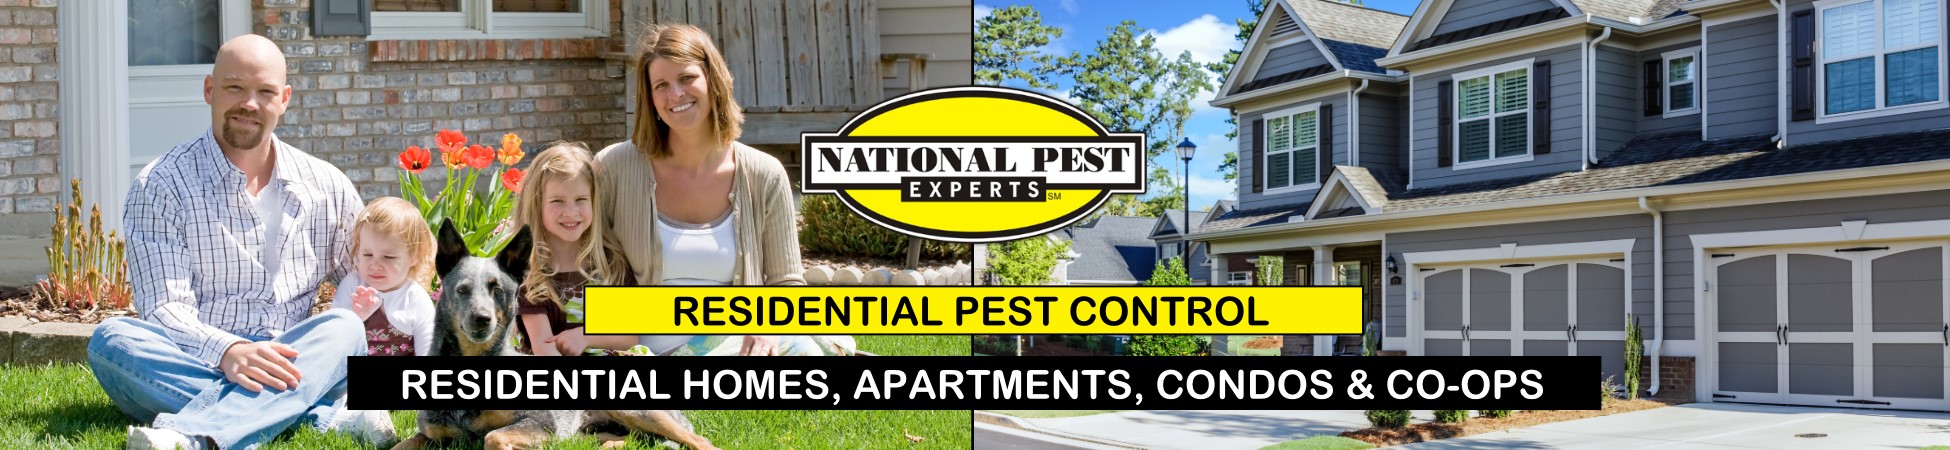 National Pest Experts - Residential exterminating and pest control in Muttontown, NY